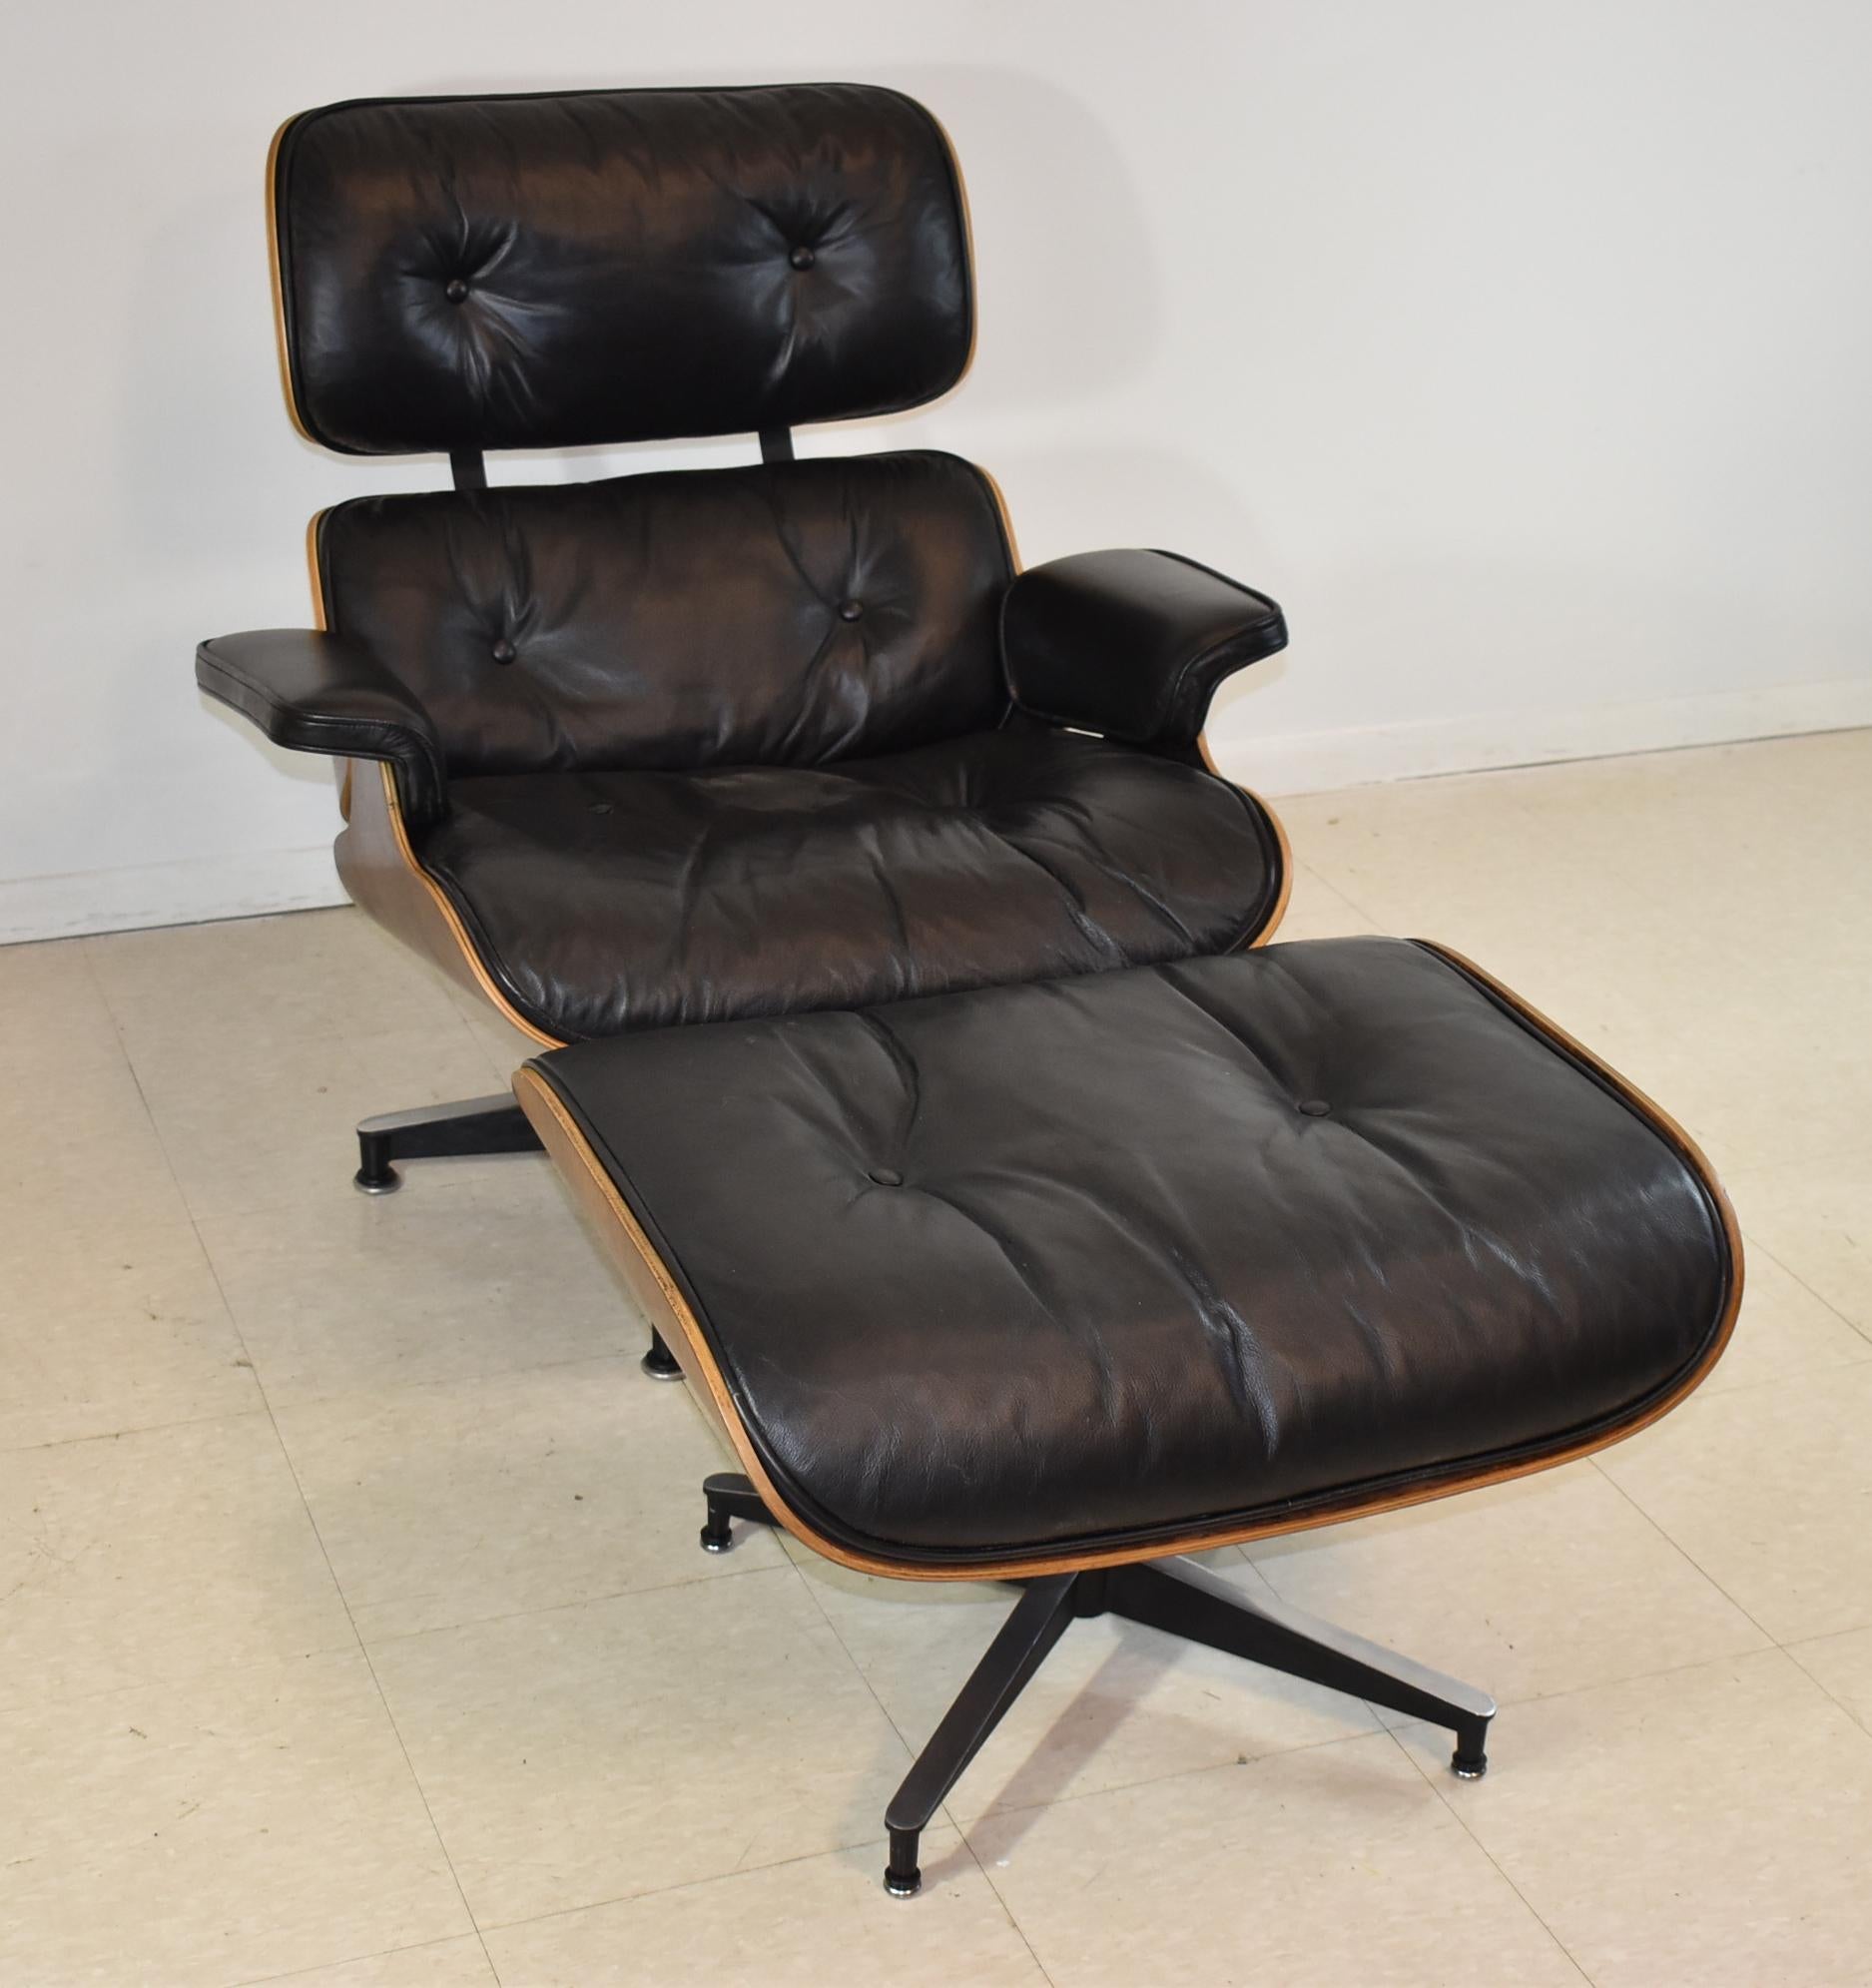 Vintage Eames black leather and rosewood chair and ottoman. Original finish. One button is loose.